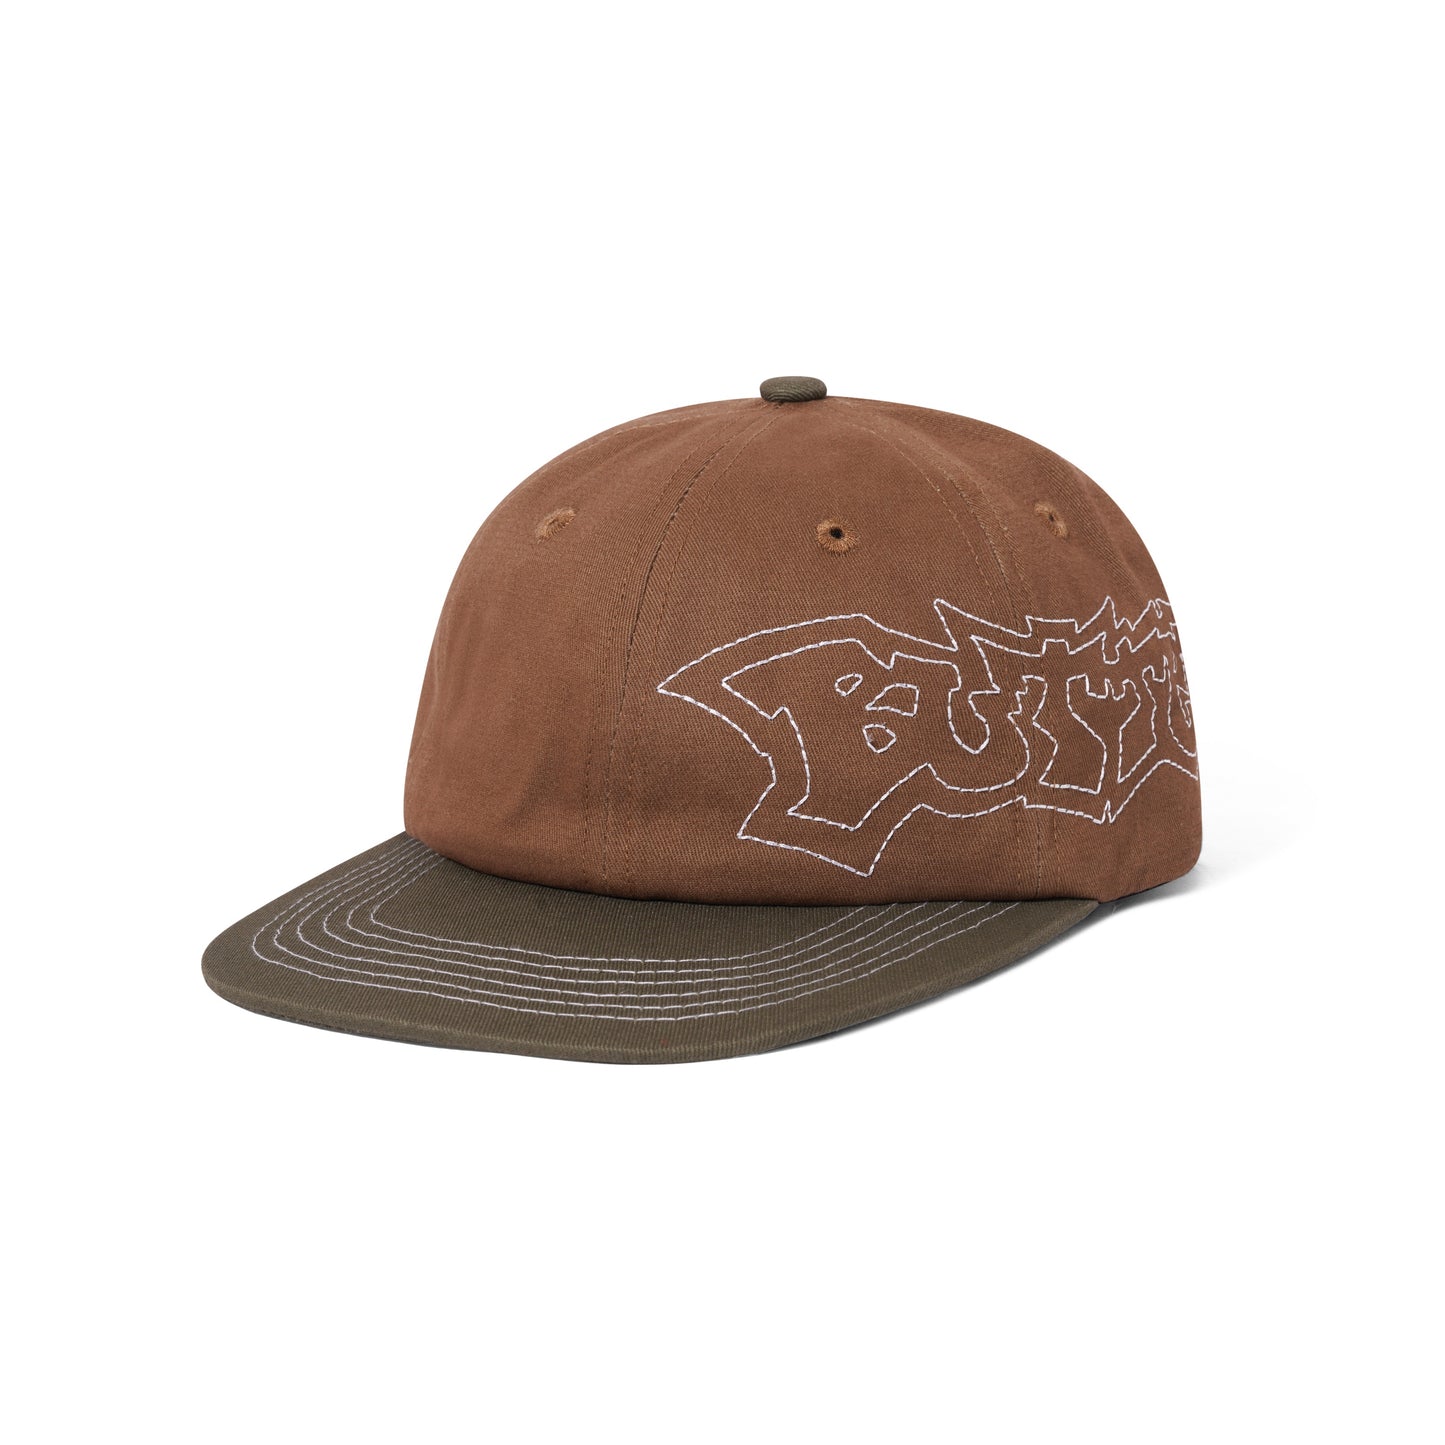 Butter Goods - Yard 6 Panel Cap - Brown/Army